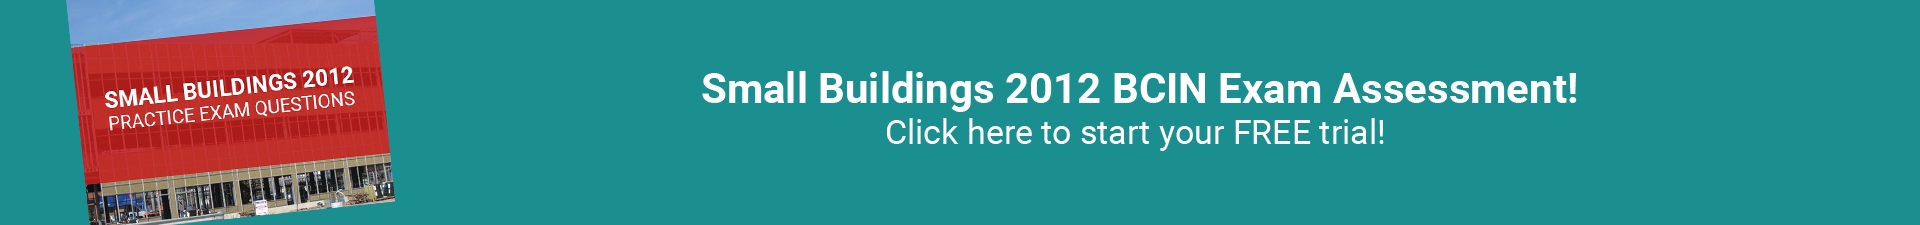 Small Buildings 2012 Free Assessment